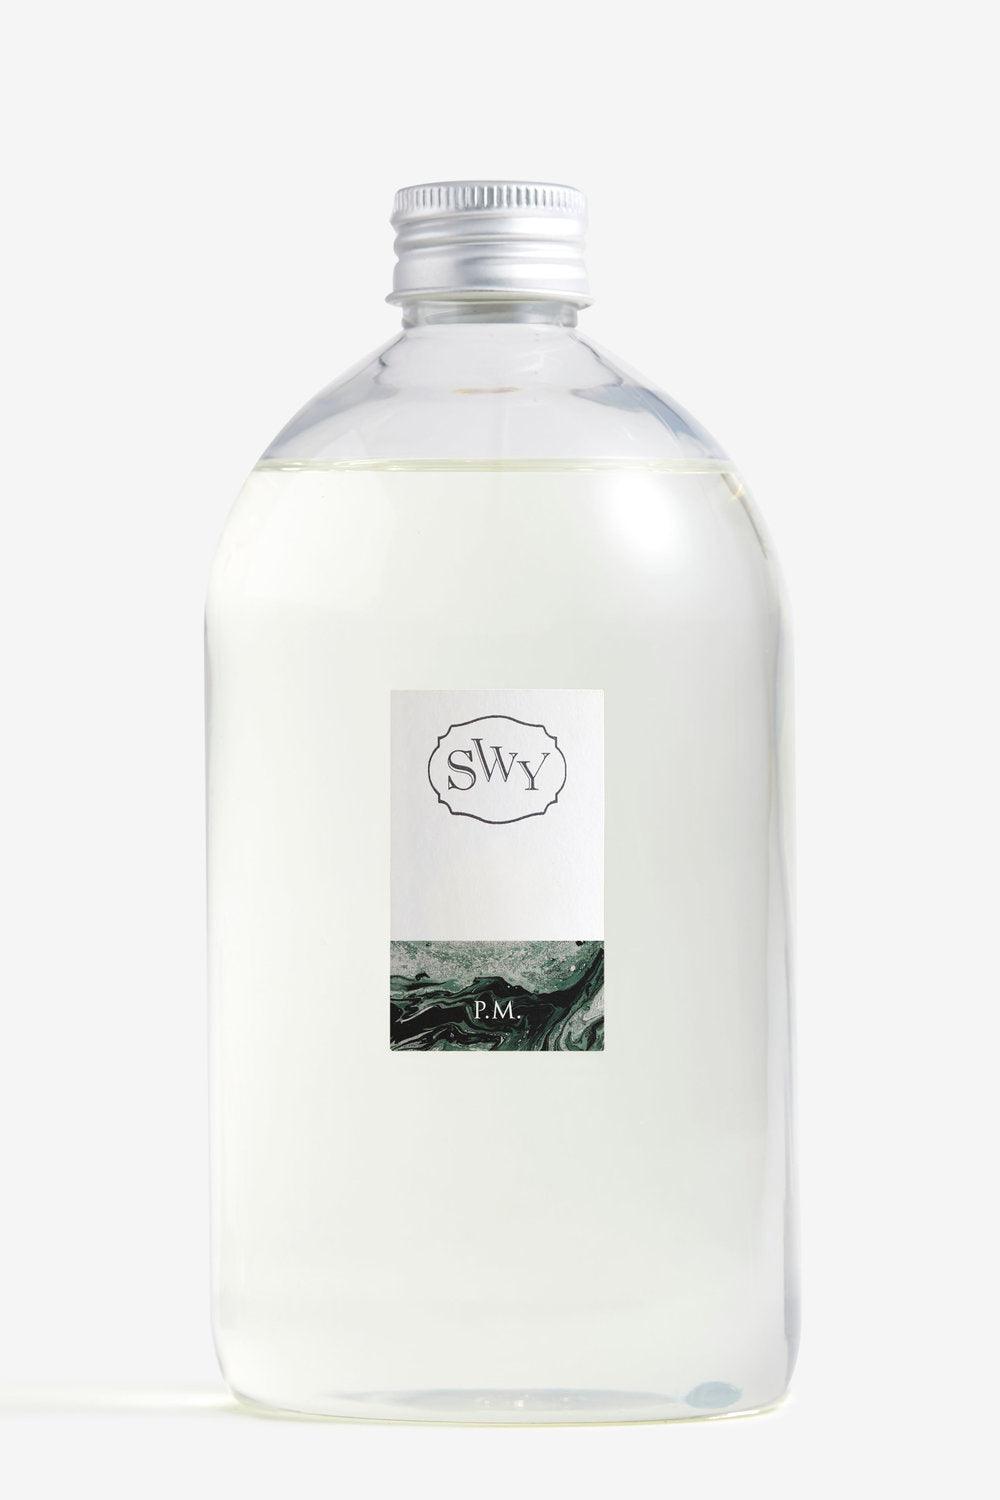 Reeds Diffuser – P.M. - SWY - Scent With You